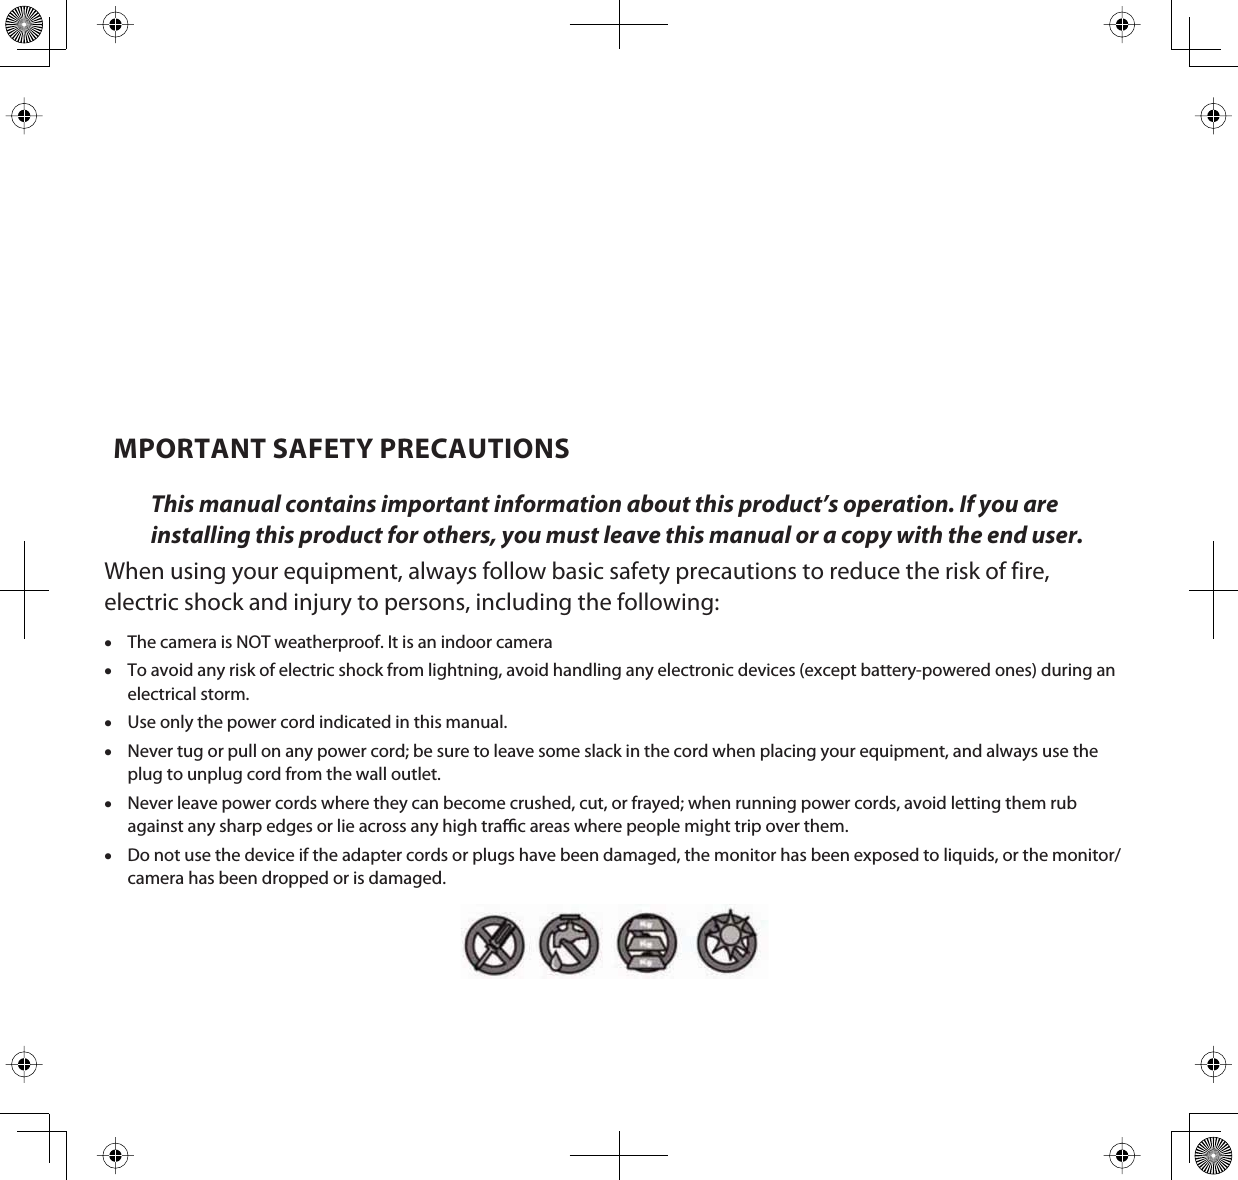 MPORTANT SAFETY PRECAUTIONSThis manual contains important information about this product’s operation. If you are installing this product for others, you must leave this manual or a copy with the end user.When using your equipment, always follow basic safety precautions to reduce the risk of fire, electric shock and injury to persons, including the following:xThe camera is NOT weatherproof. It is an indoor cameraxTo avoid any risk of electric shock from lightning, avoid handling any electronic devices (except battery-powered ones) during an electrical storm. xUse only the power cord indicated in this manual.xNever tug or pull on any power cord; be sure to leave some slack in the cord when placing your equipment, and always use the plug to unplug cord from the wall outlet.xNever leave power cords where they can become crushed, cut, or frayed; when running power cords, avoid letting them rub against any sharp edges or lie across any high trac areas where people might trip over them. xDo not use the device if the adapter cords or plugs have been damaged, the monitor has been exposed to liquids, or the monitor/camera has been dropped or is damaged.